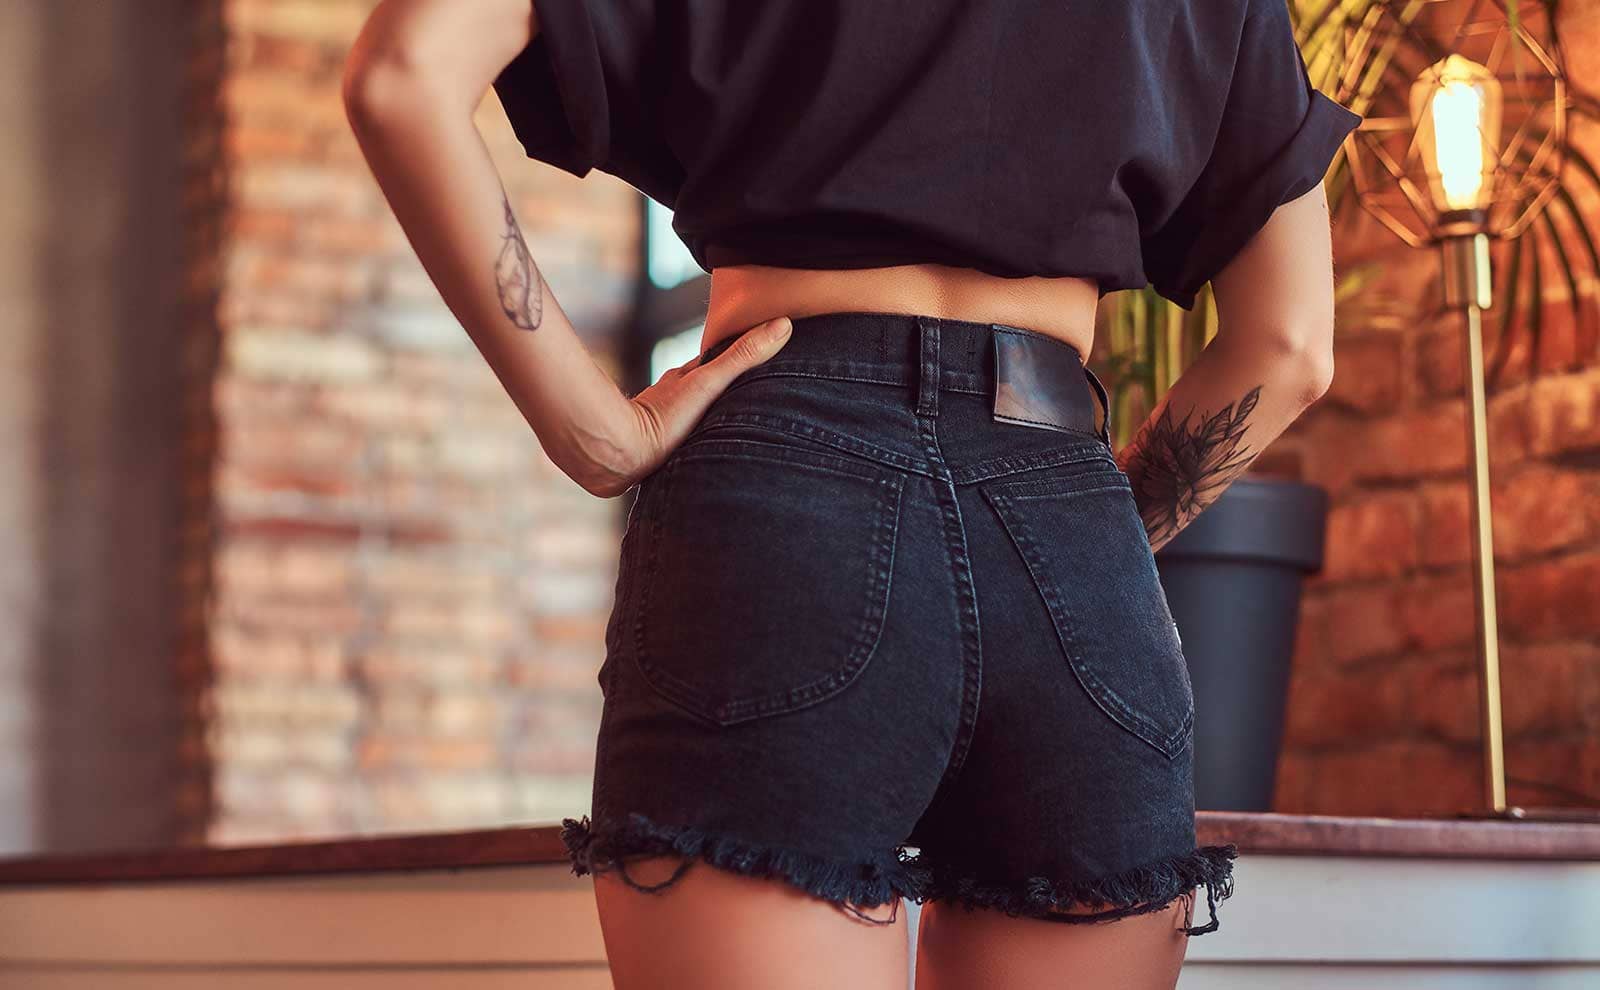 How To: Cut Jeans into Shorts